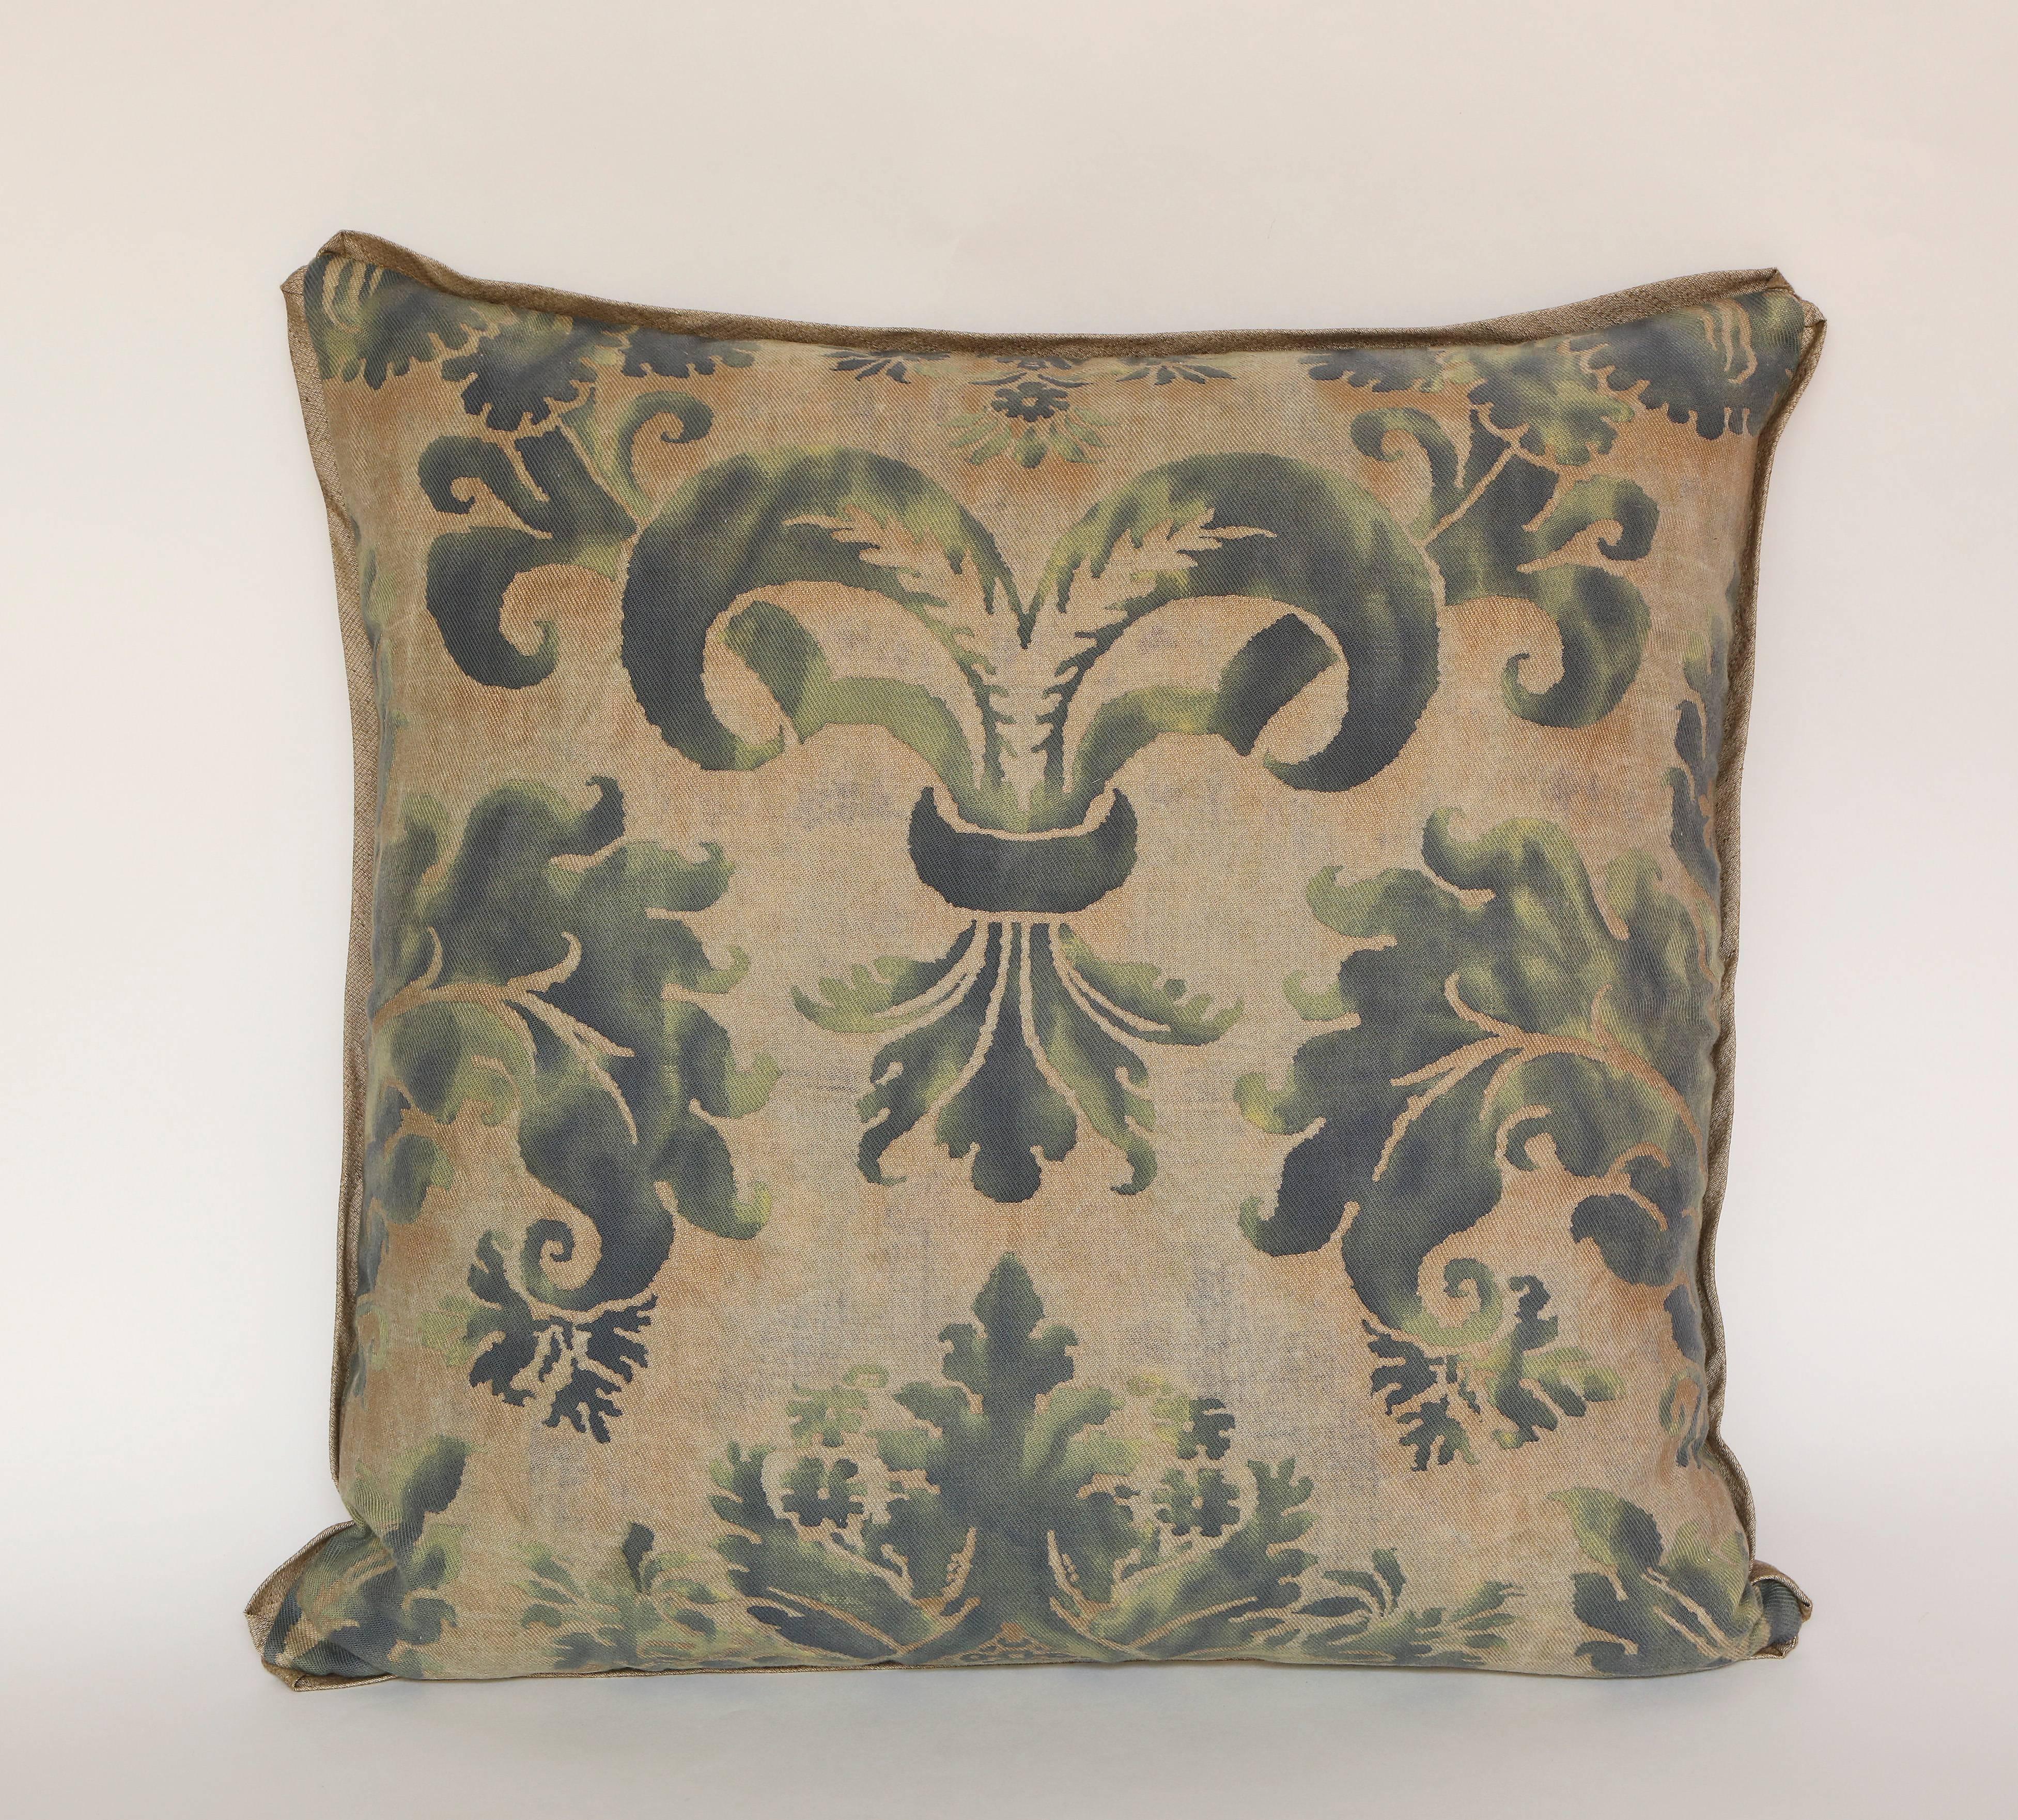 Contemporary Pair of Fortuny Pillows in the Glicine Pattern